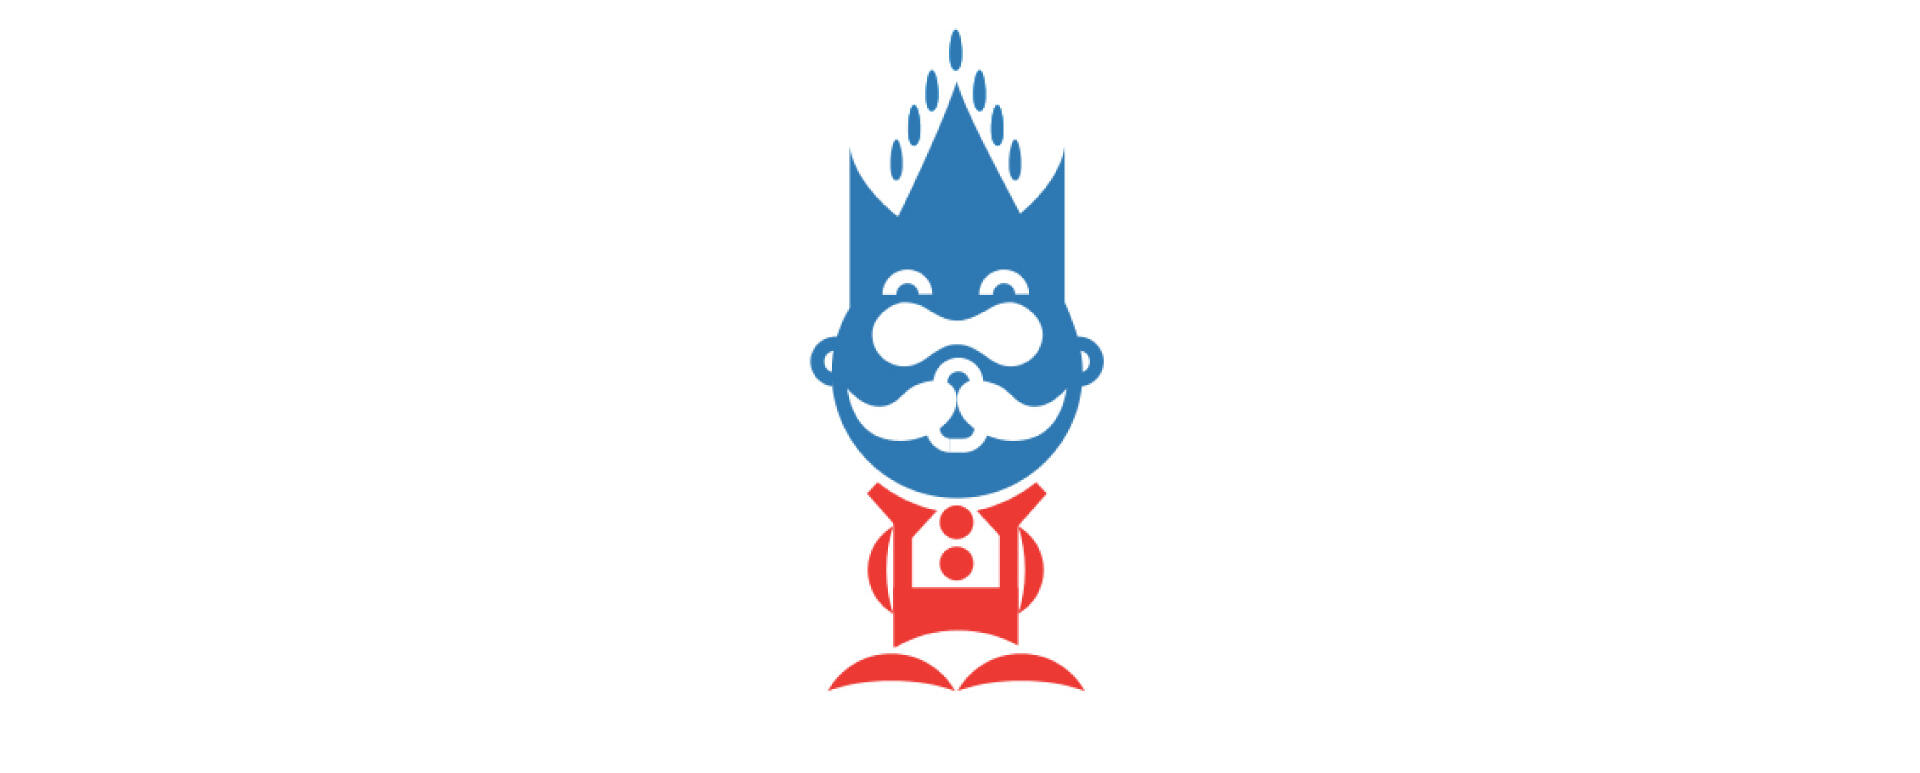 We are a proud sponsor of the next Drupal Camp in Poland